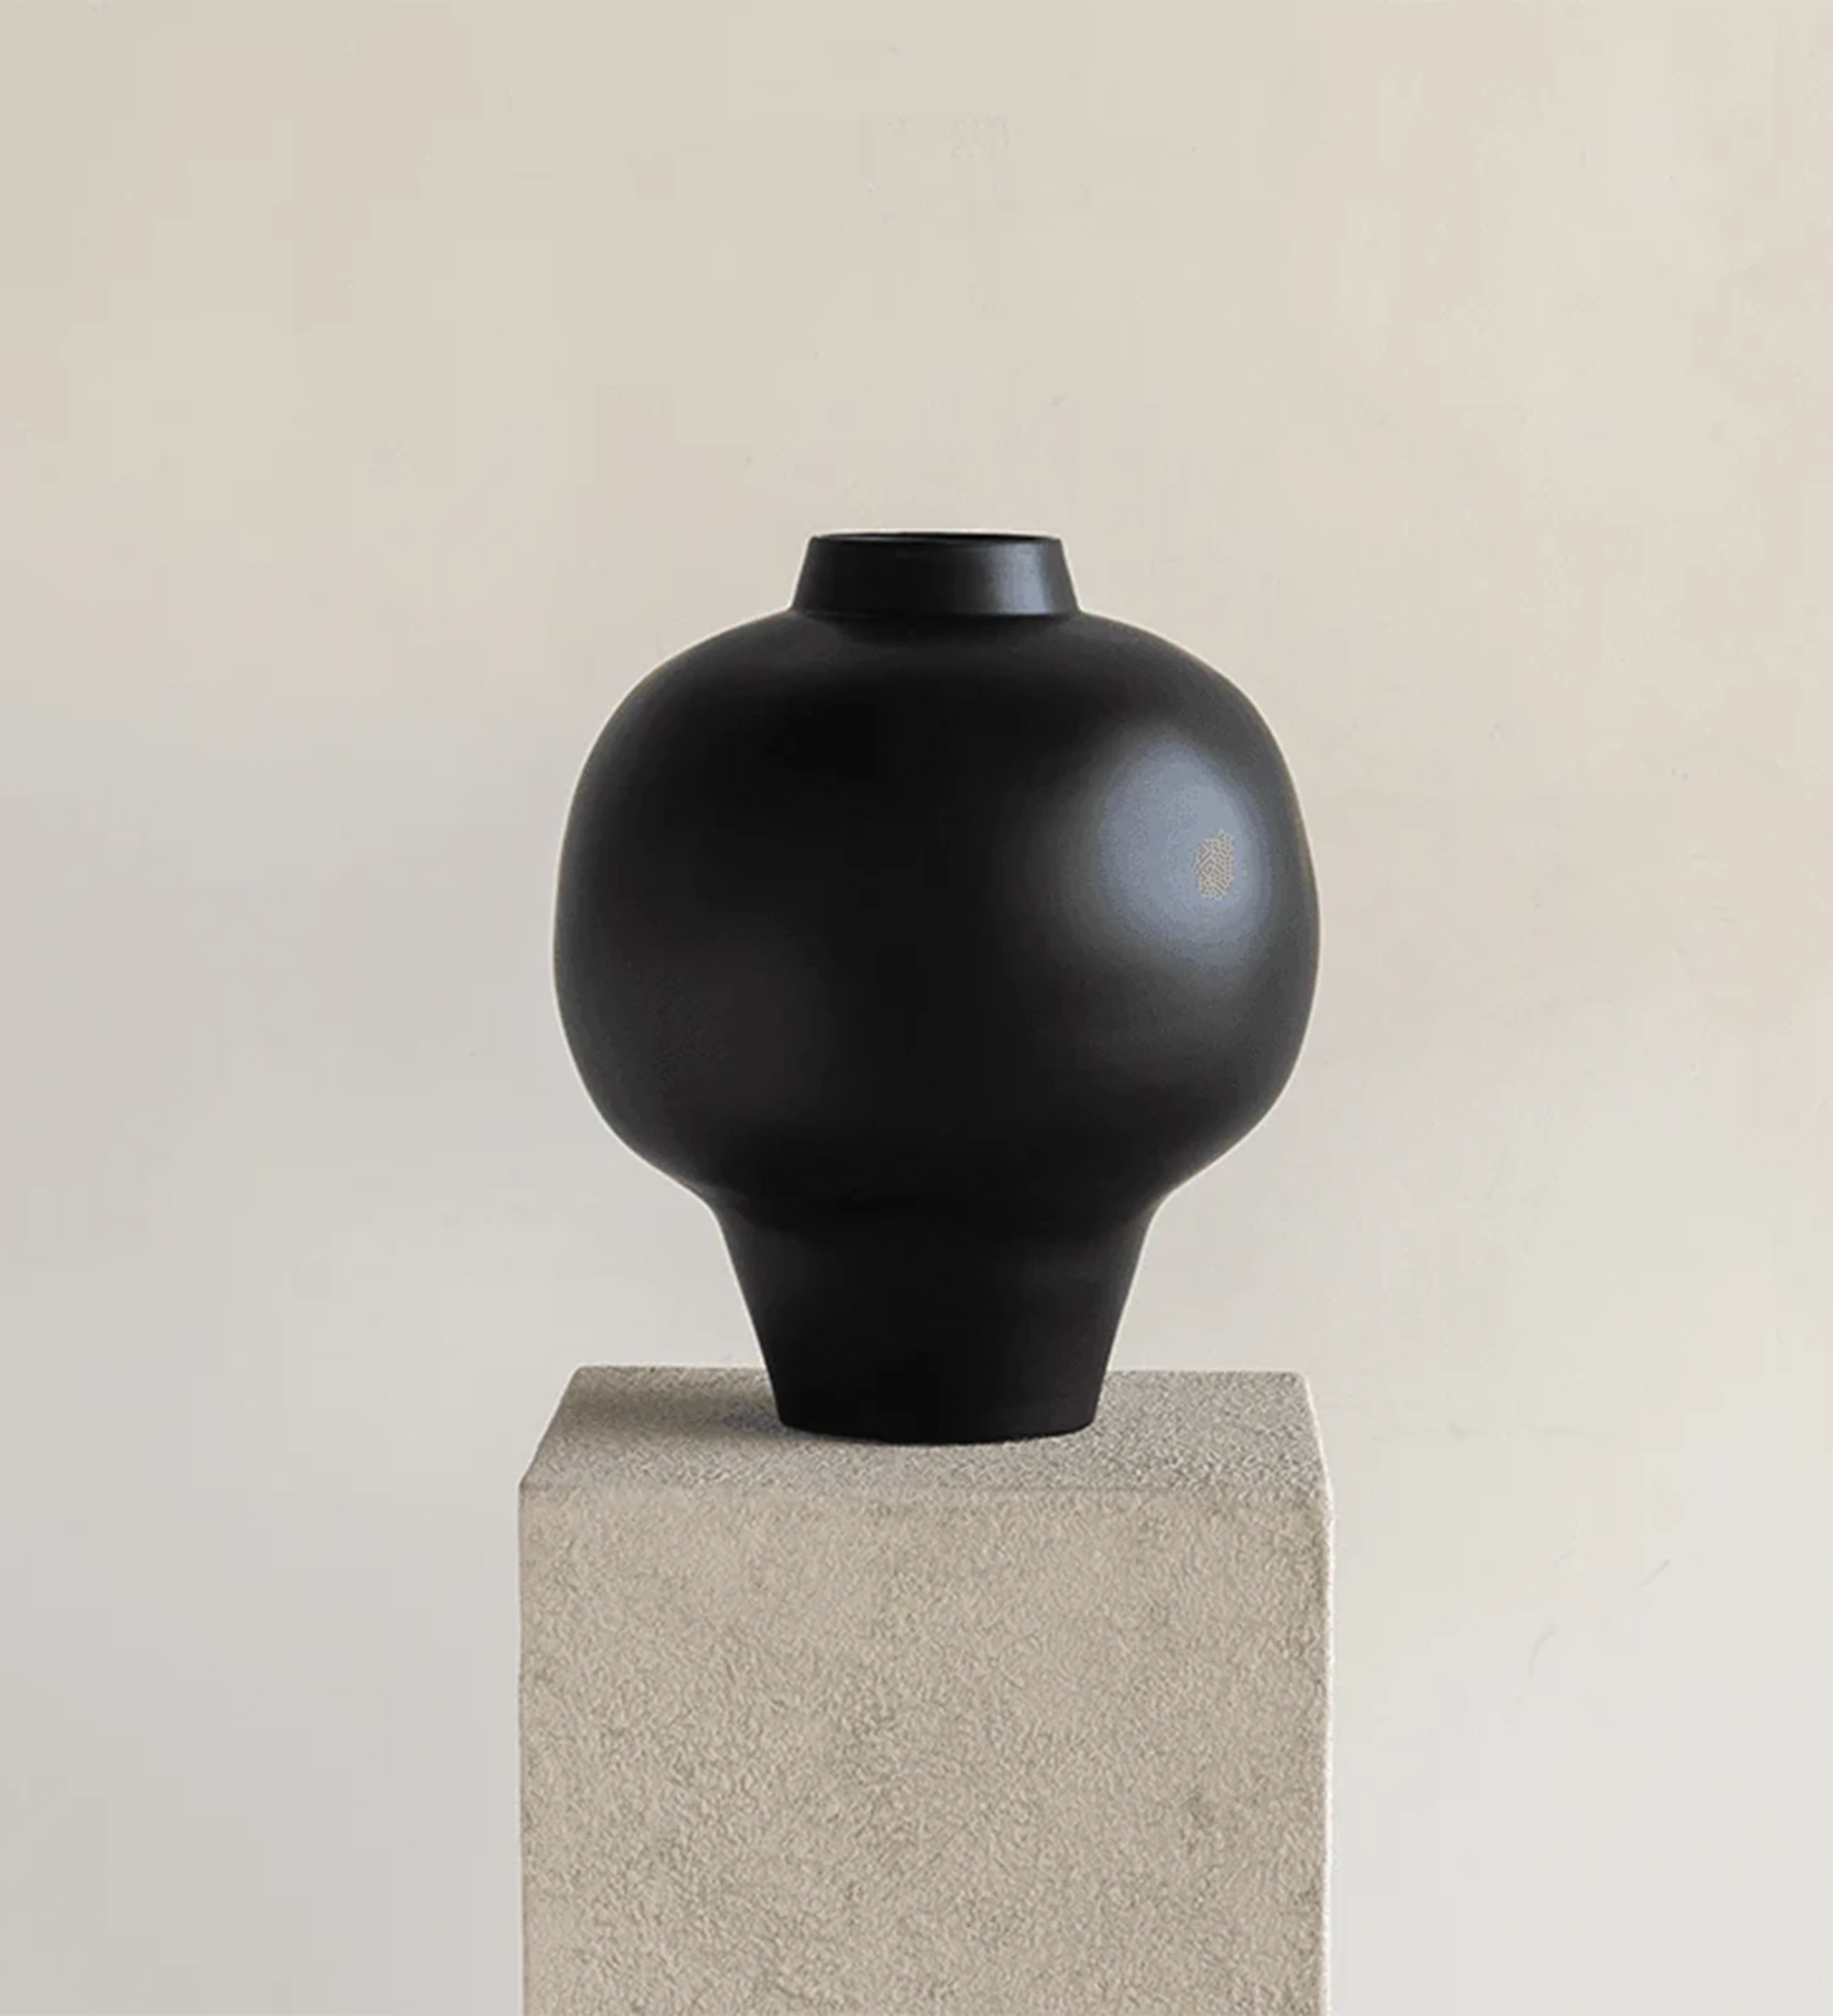 Handmade vase with ceramic structure finished with matte black enamel.